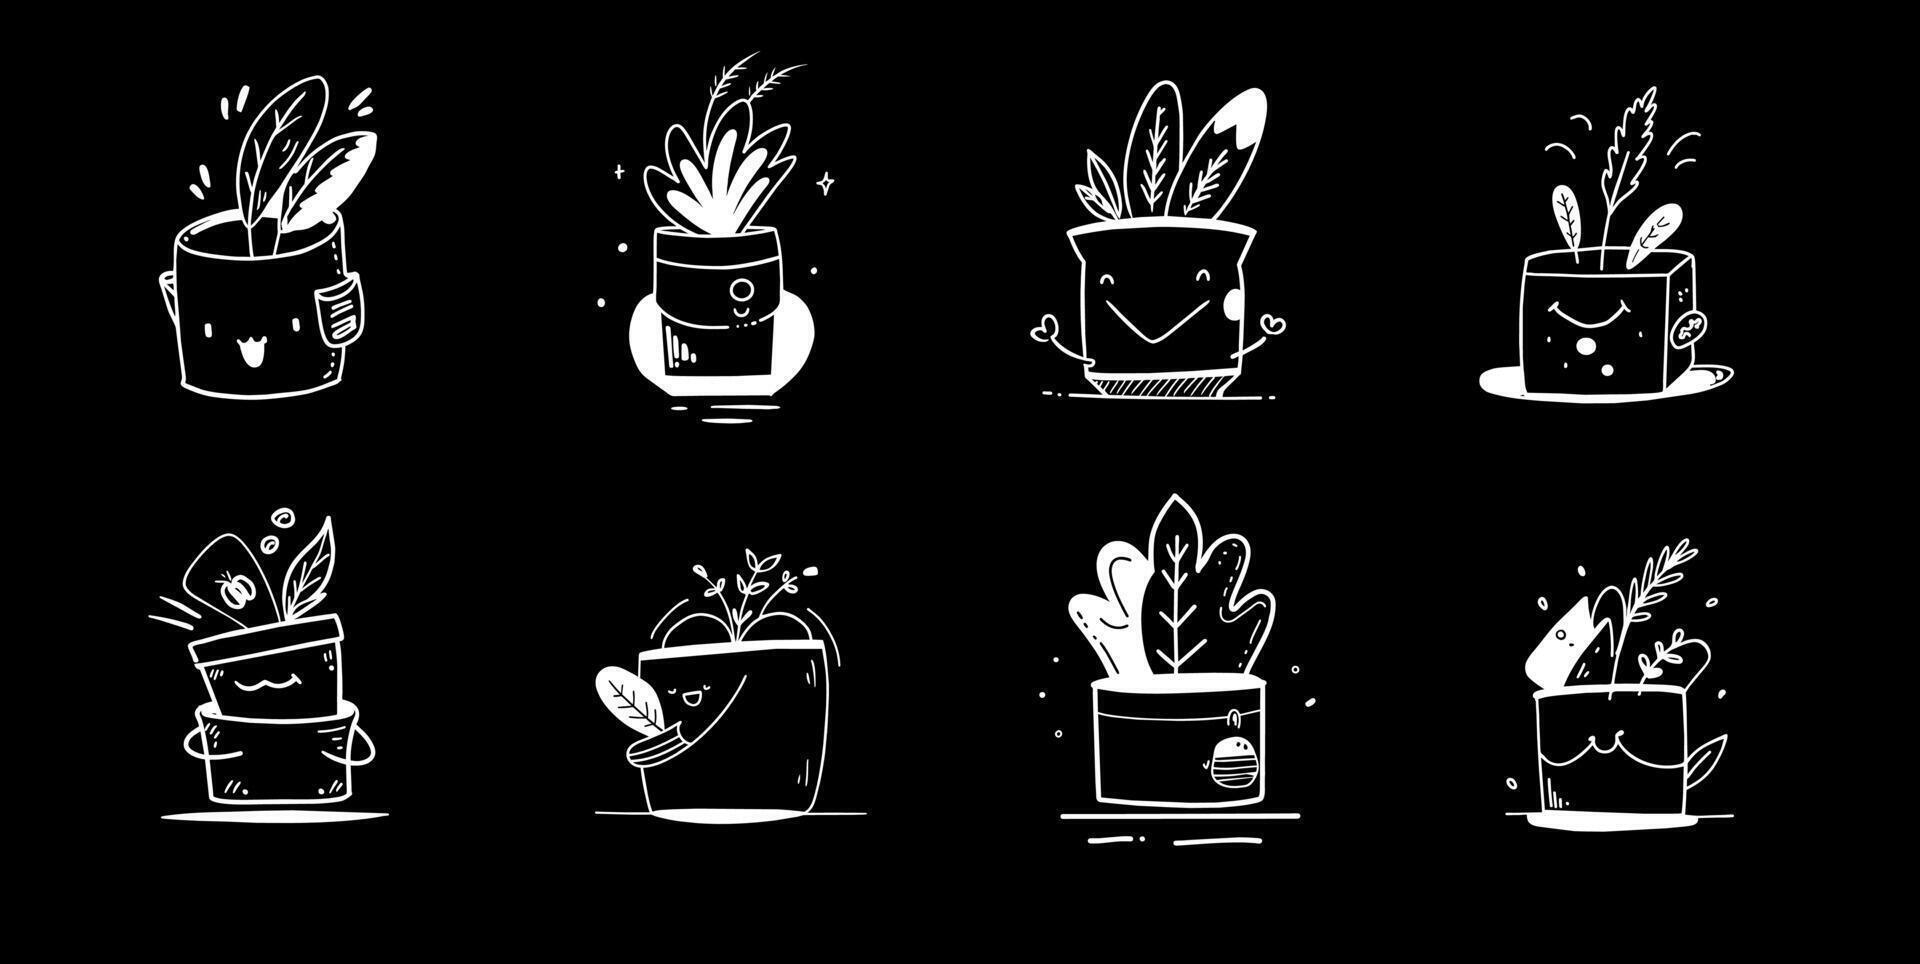 Set of pixel potted plant icons of potted plants on a black background . High quality. Collection of line art illustrations featuring various houseplants. The minimalist black and white drawings. vector